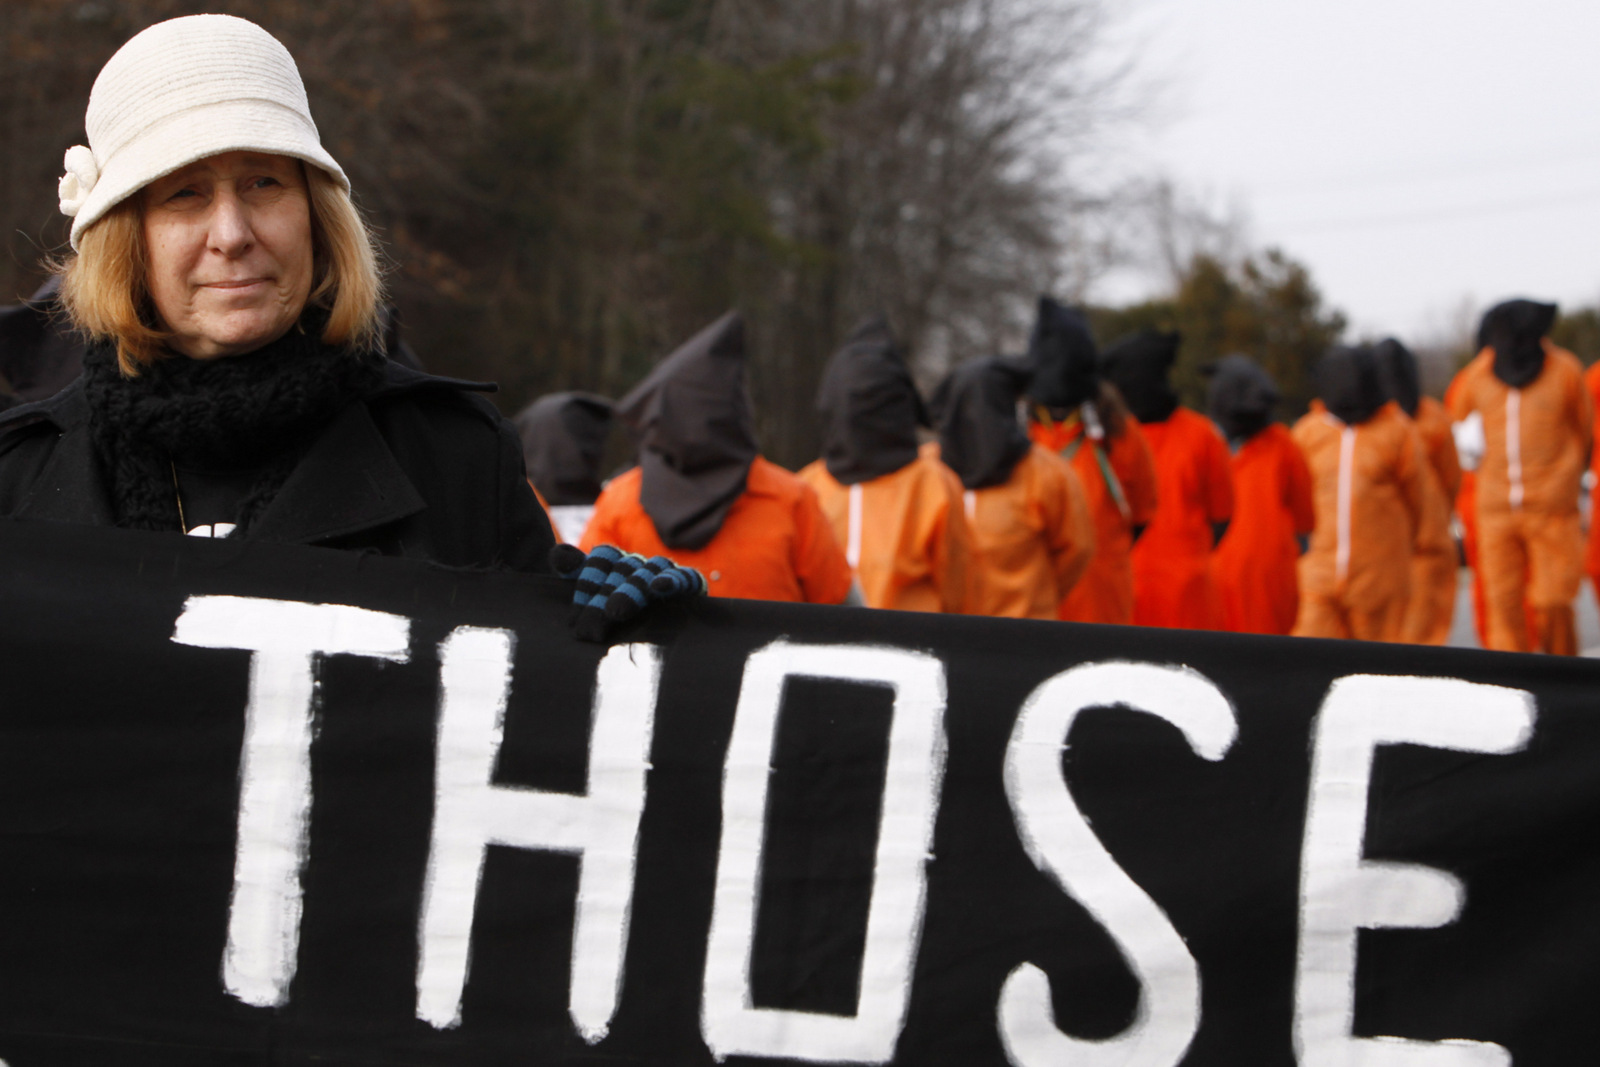 Cindy Sheehan walks with participants in an anti-war protest that she organized outside of CIA headquarters in Langley, Va. on Saturday Jan. 16, 2010. (AP/Jacquelyn Martin)